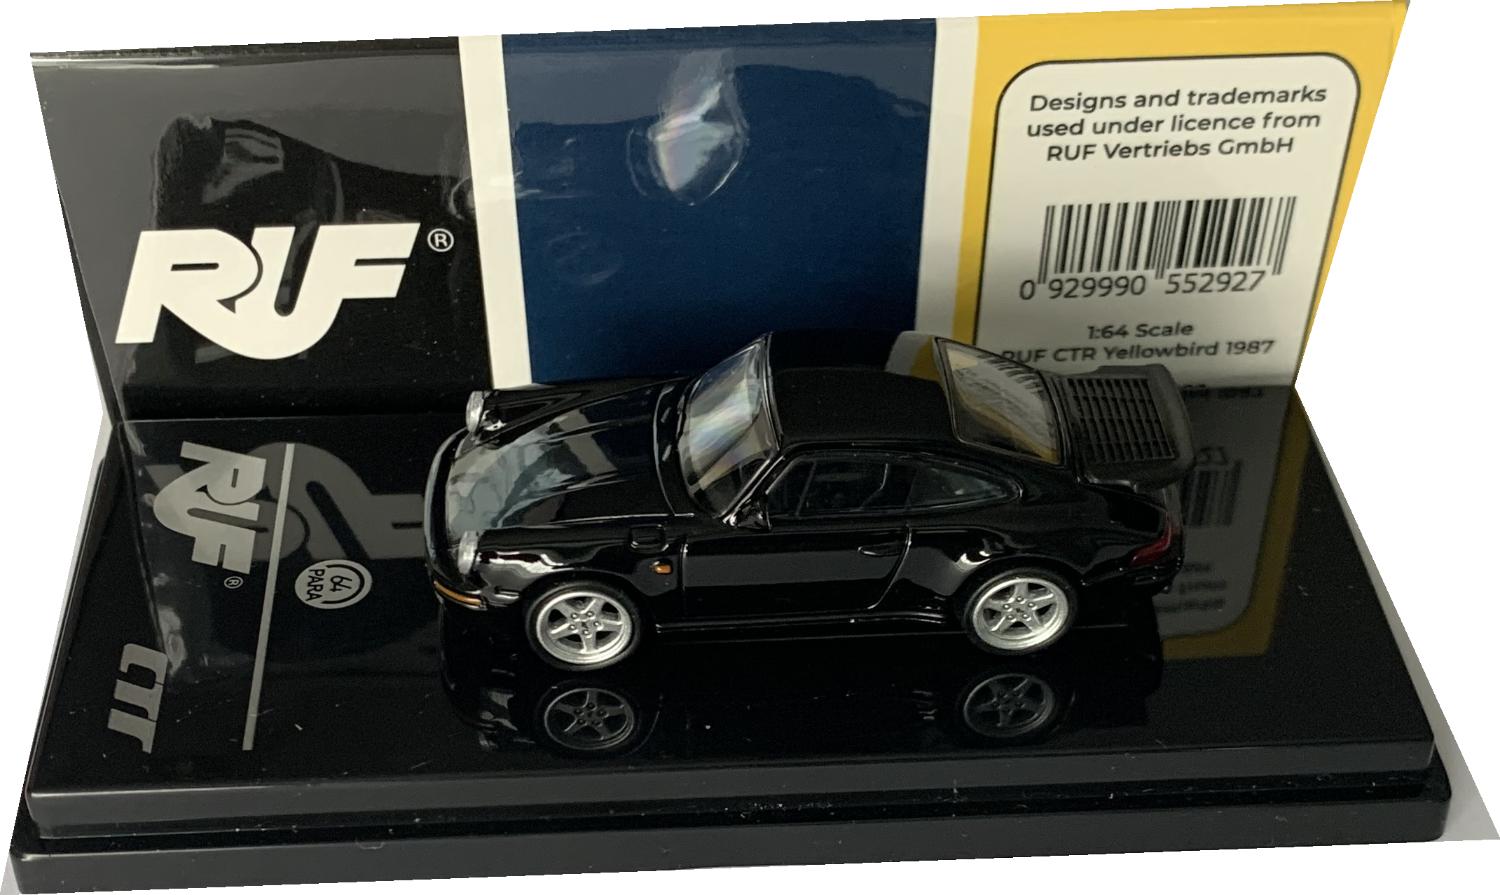 RUF CTR Yellowbird 1987 in black 1:64 scale model from Paragon Models , based on the Porsche 911